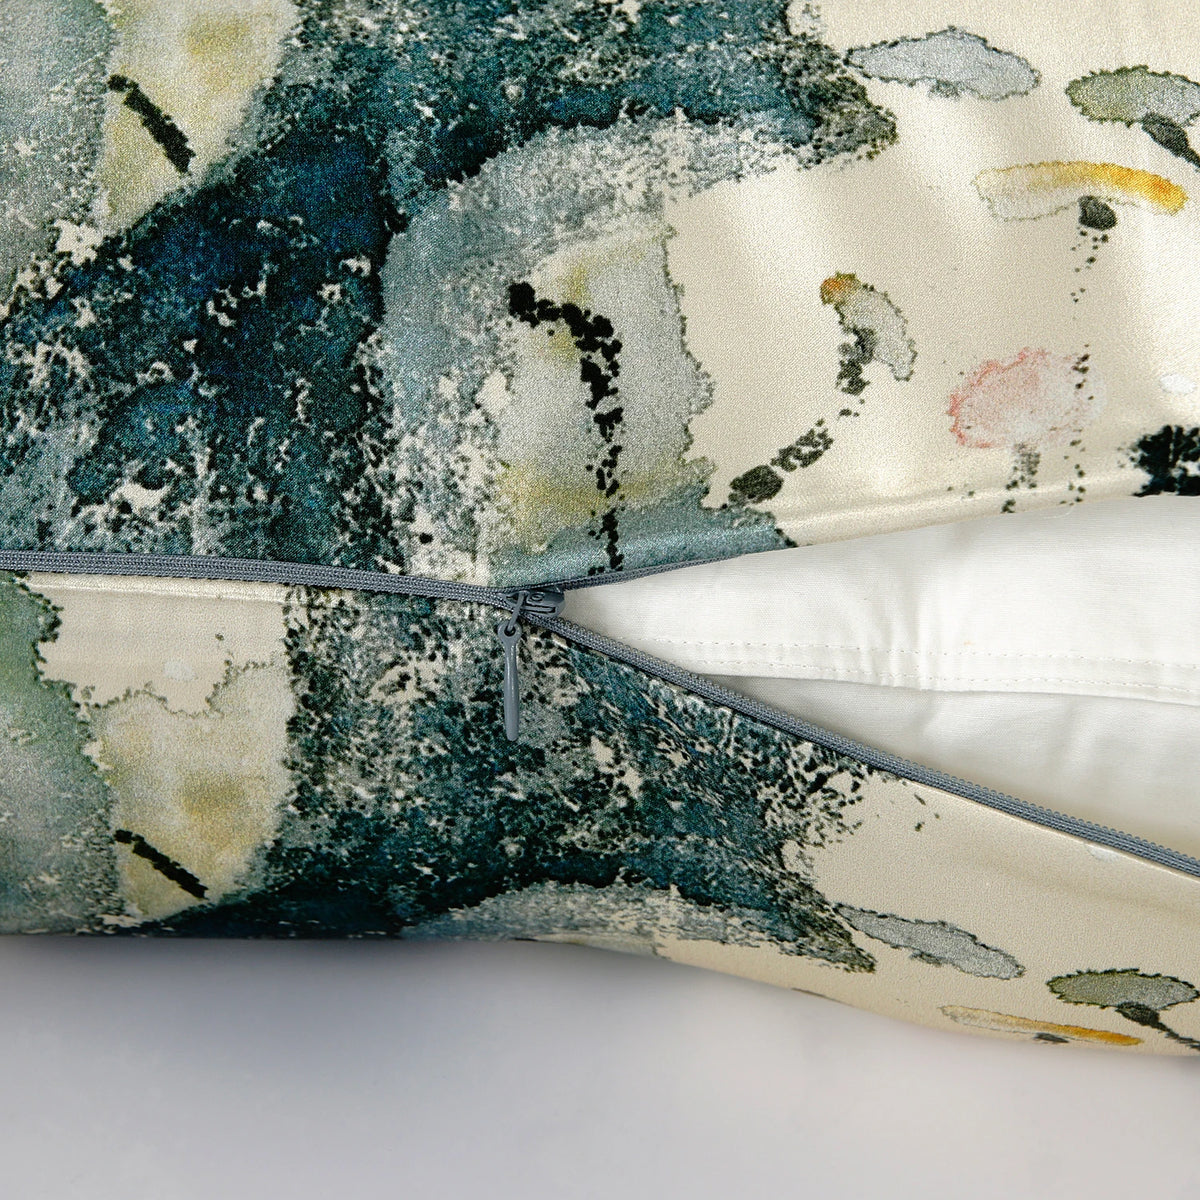 Marble Seas 16MM 100% Mulberry Silk Pillowcase With Zipper